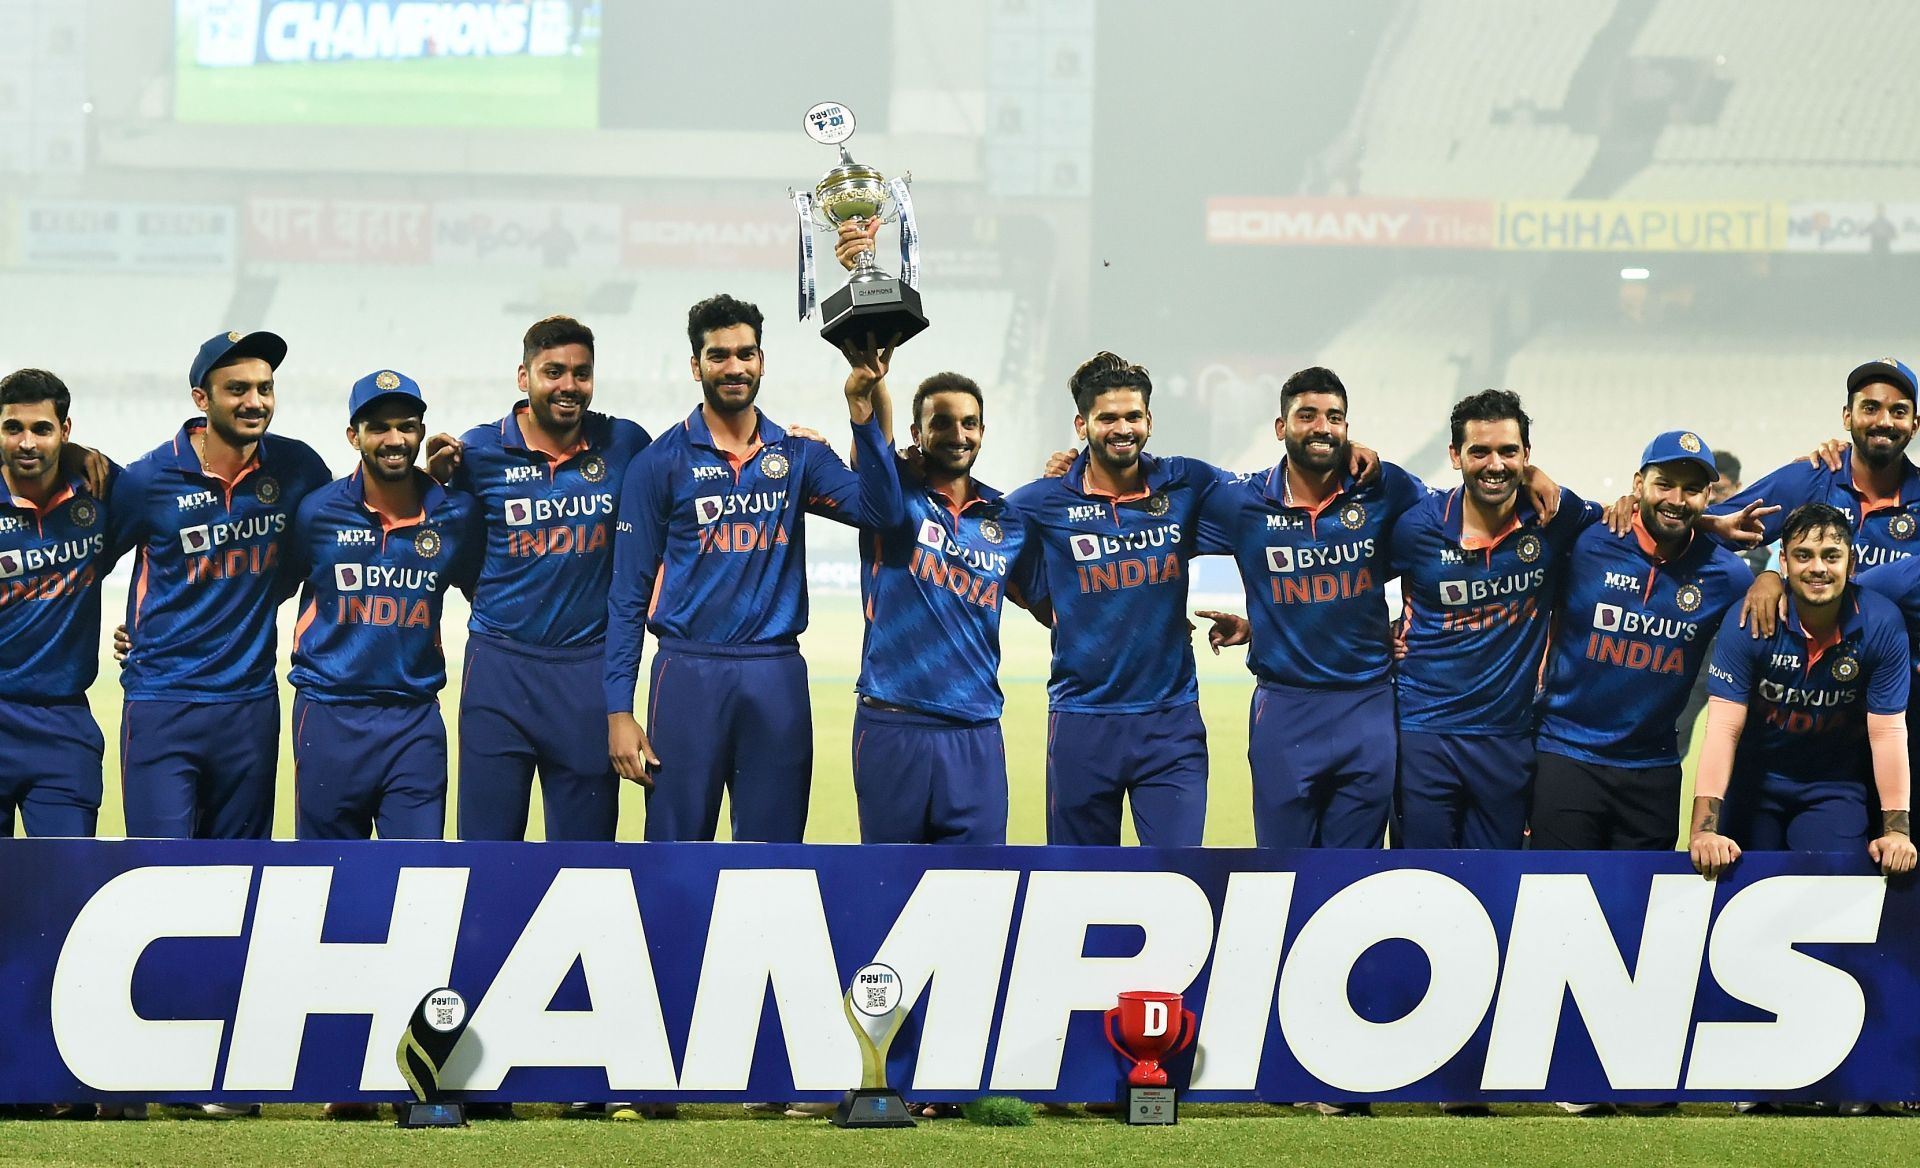 India thumped New Zealand 3-0 in the T20I series